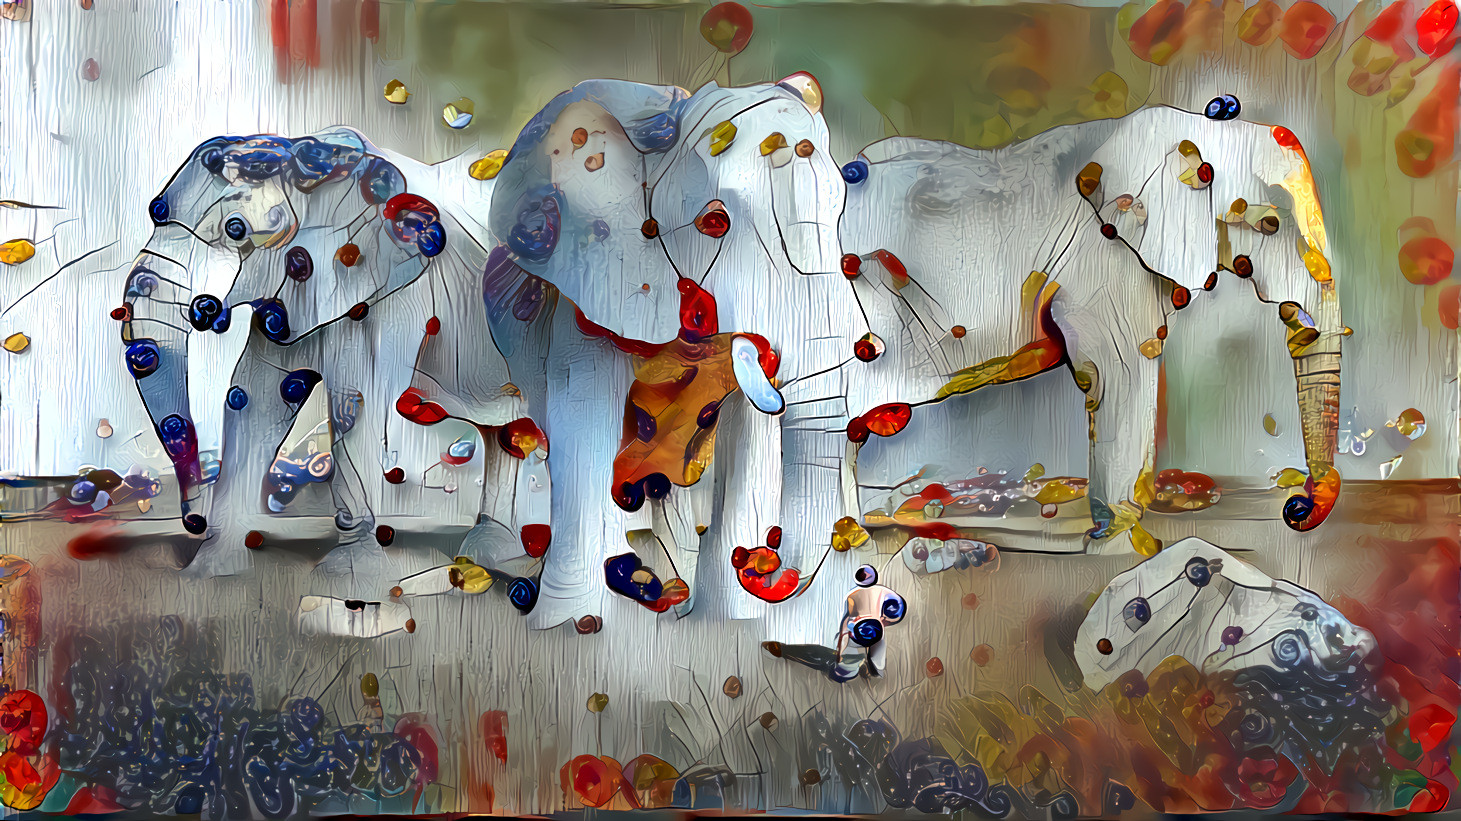 “We admire elephants in part because they demonstrate what we consider the finest human traits: empathy, self-awareness, and social intelligence. But the way we treat them puts on display the very worst of human behavior.” ― Graydon Carter